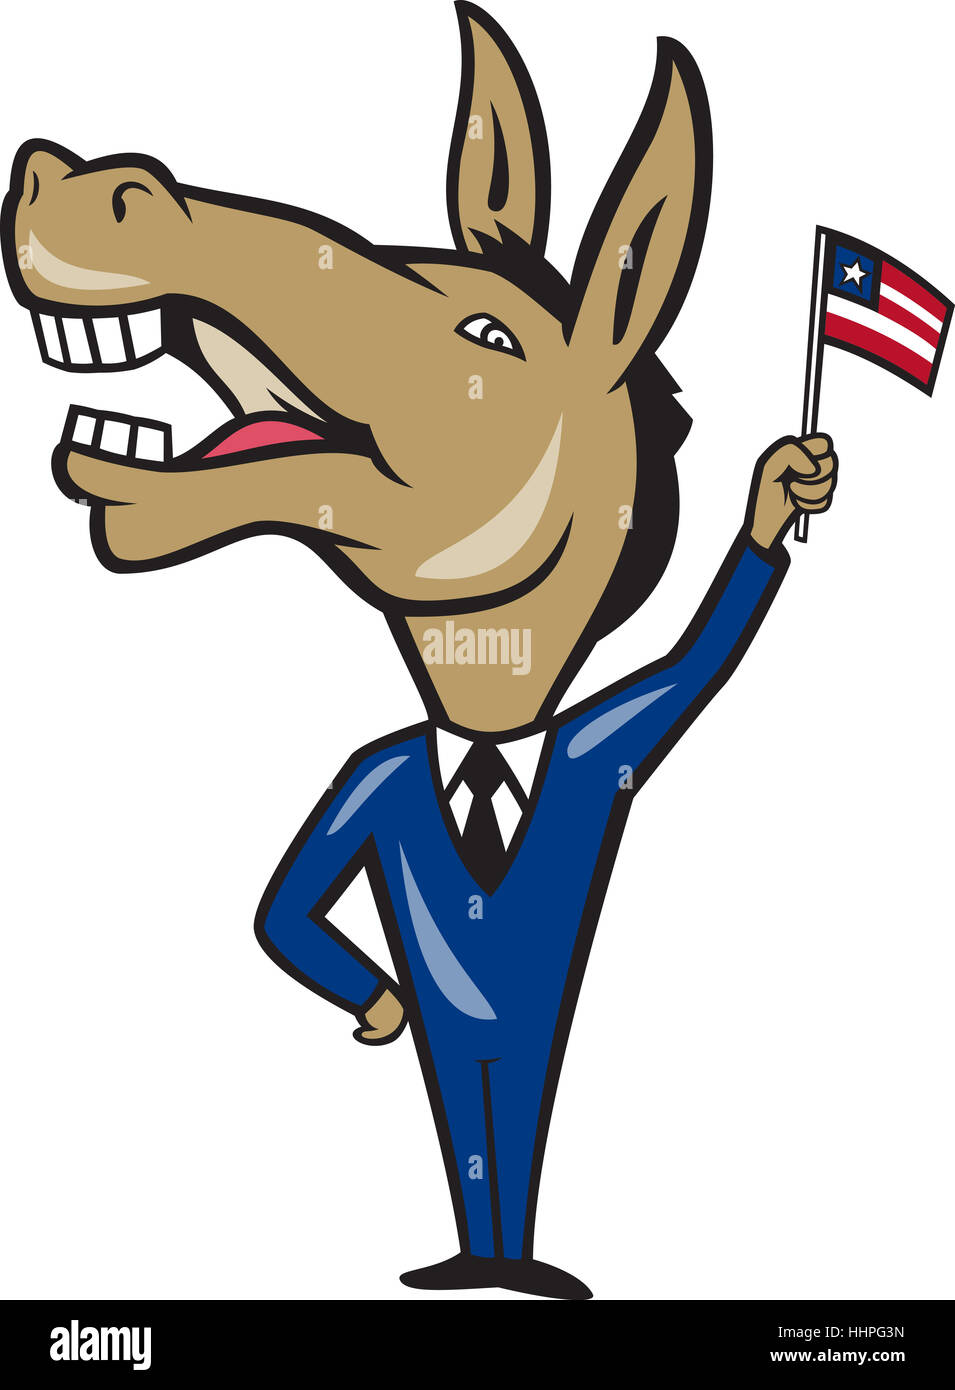 Illustration of a democrat donkey mascot of the democratic party waving  american stars and stripes flag done in cartoon style. Stock Photo